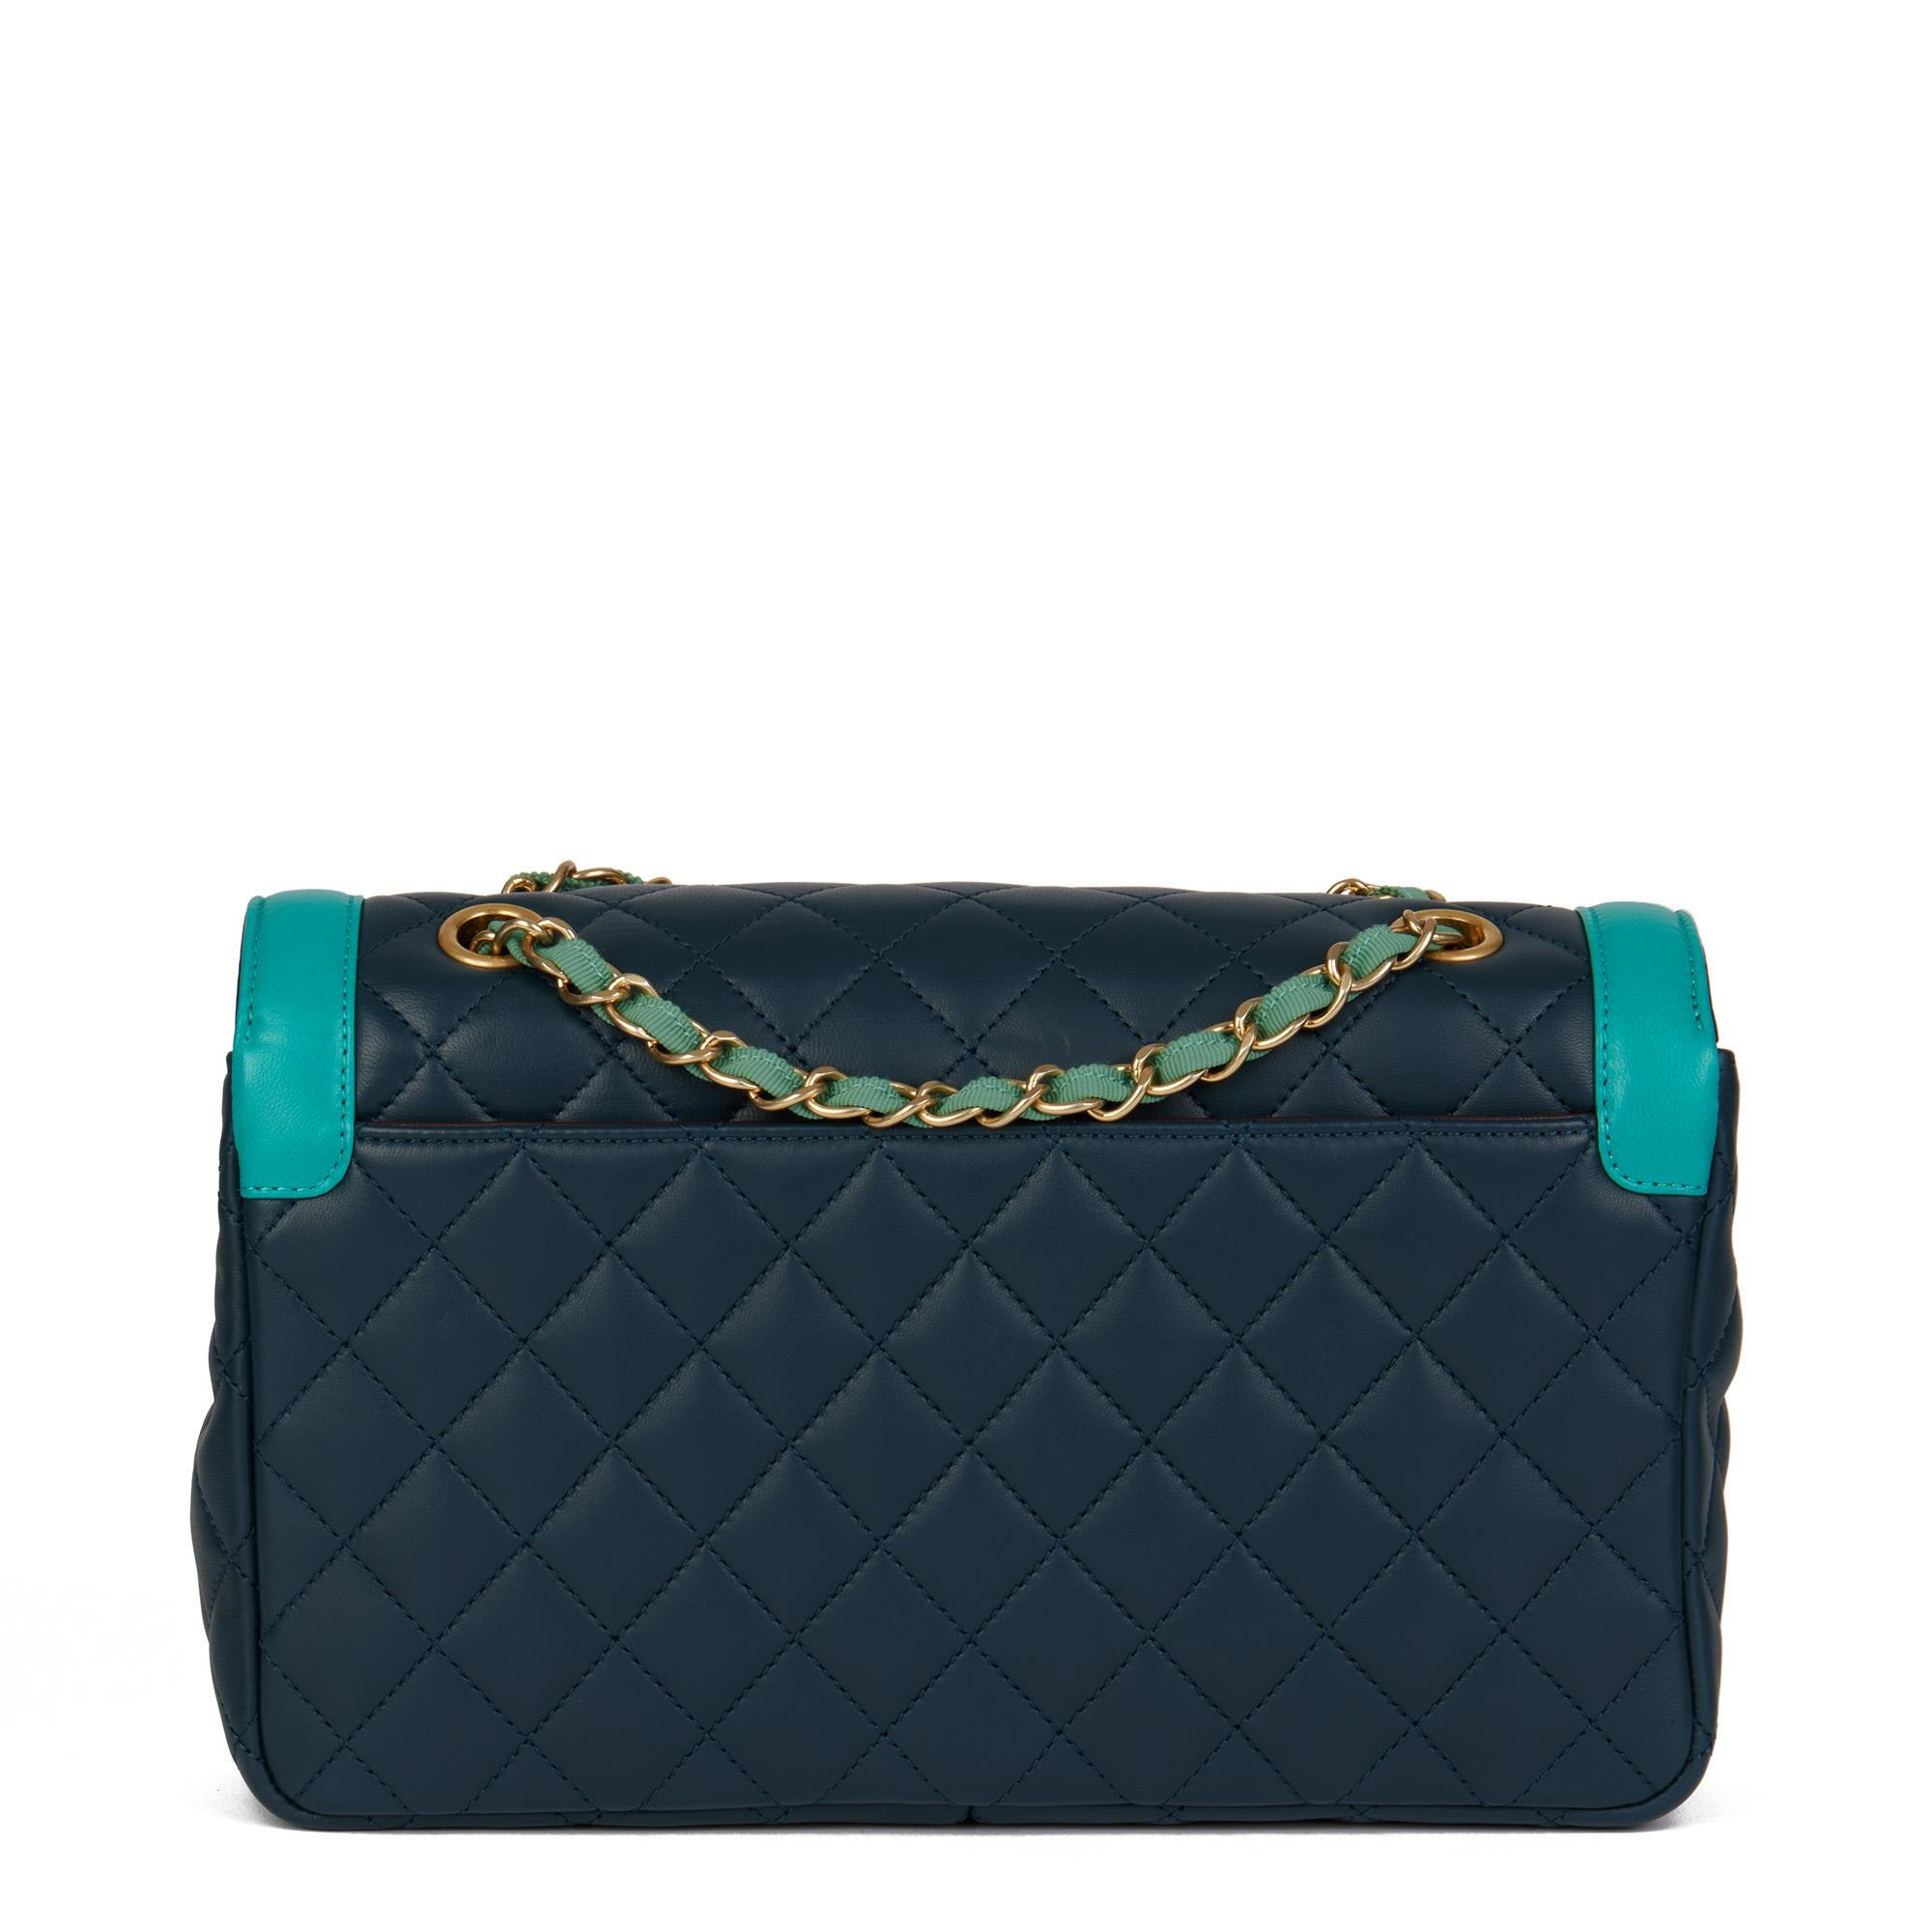 Women's CHANEL Navy & Turquoise Quilted Lambskin Medium Classic Single Flap Bag